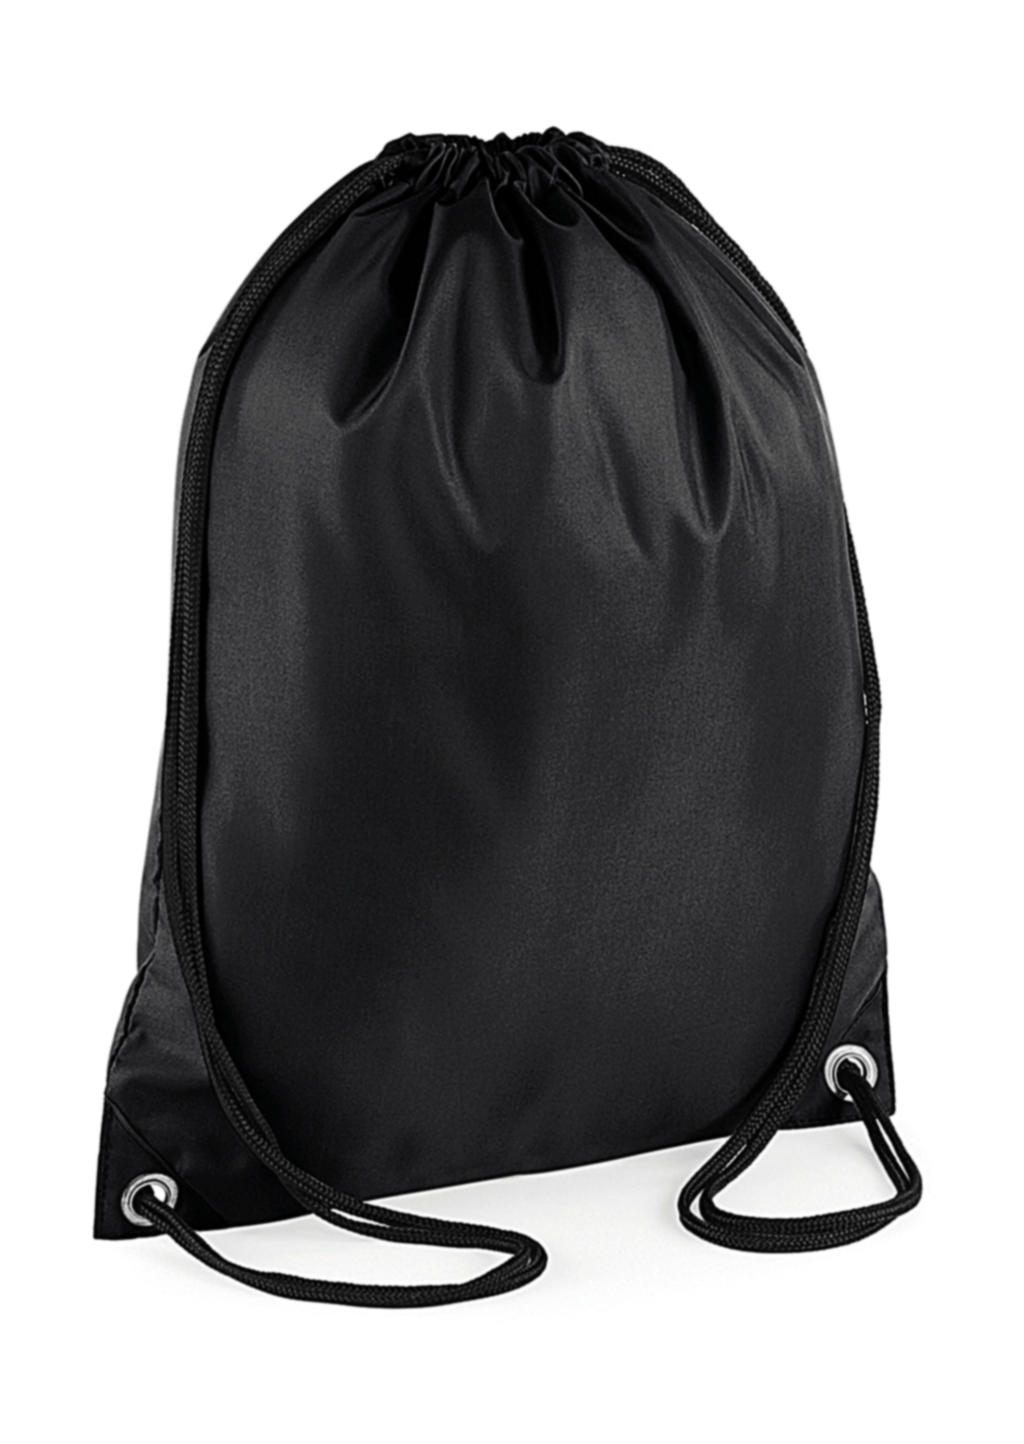  Budget Gymsac in Farbe Black